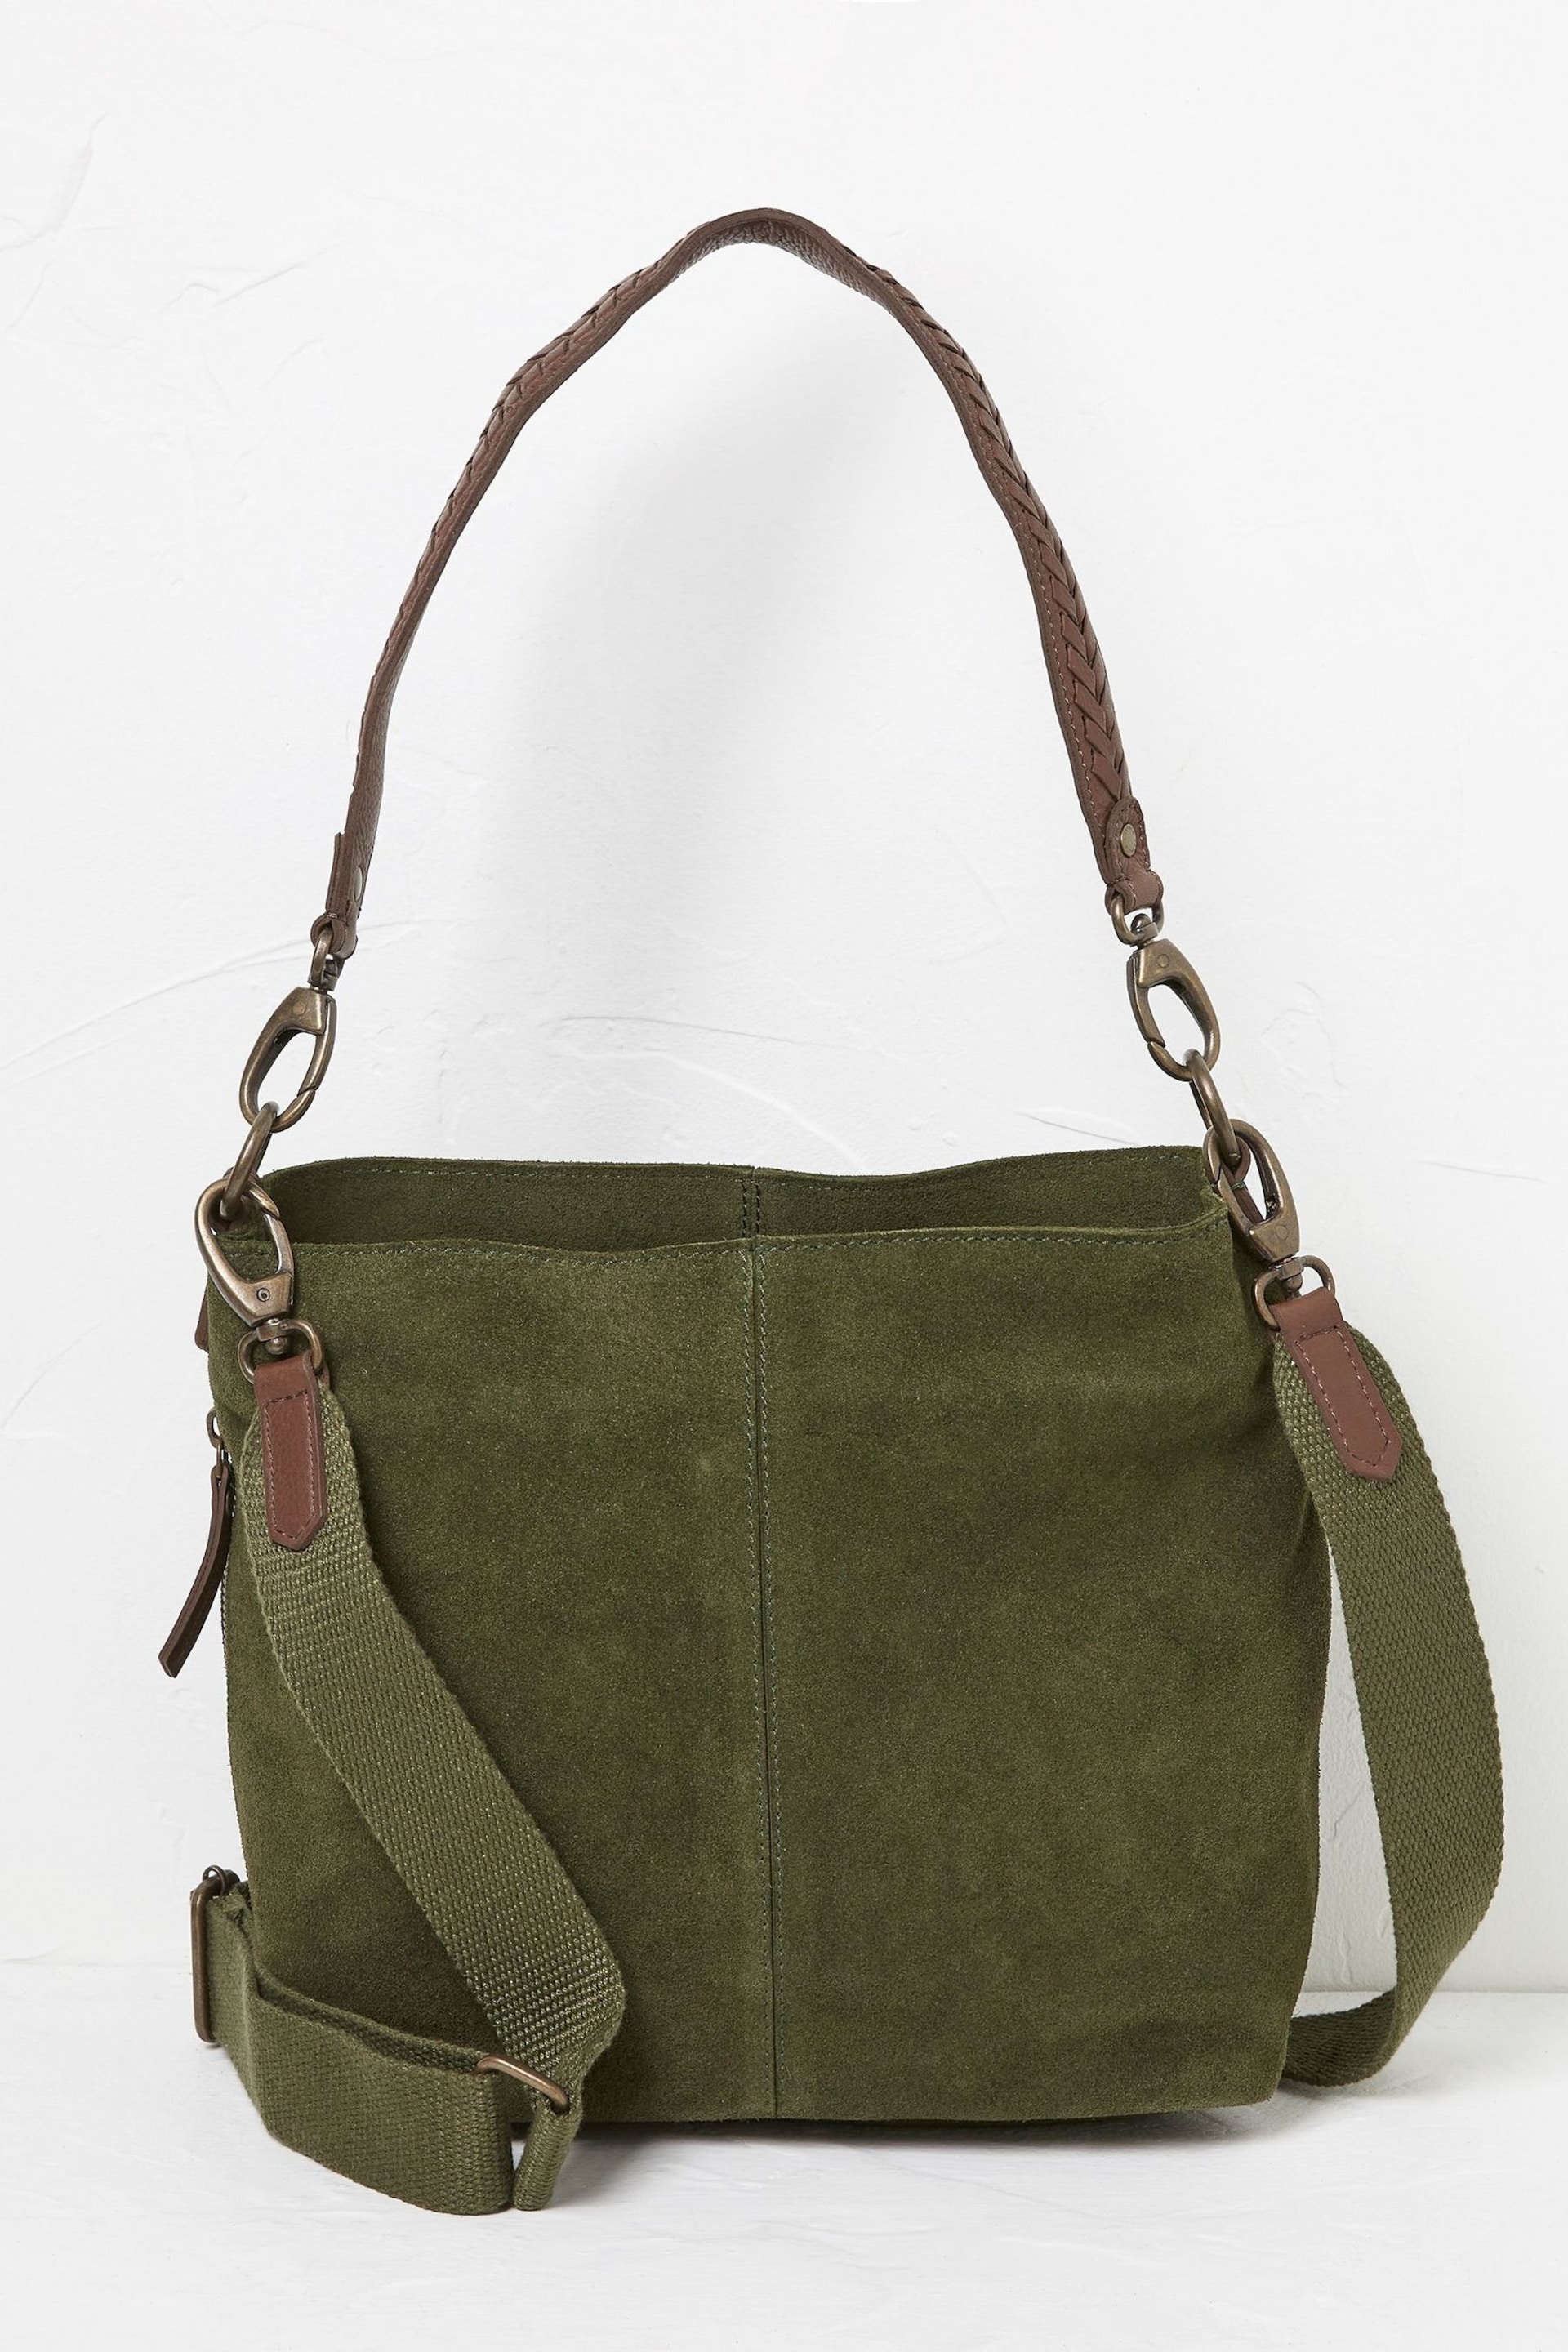 FatFace Green The Valletta Shoulder Bag - Image 1 of 4